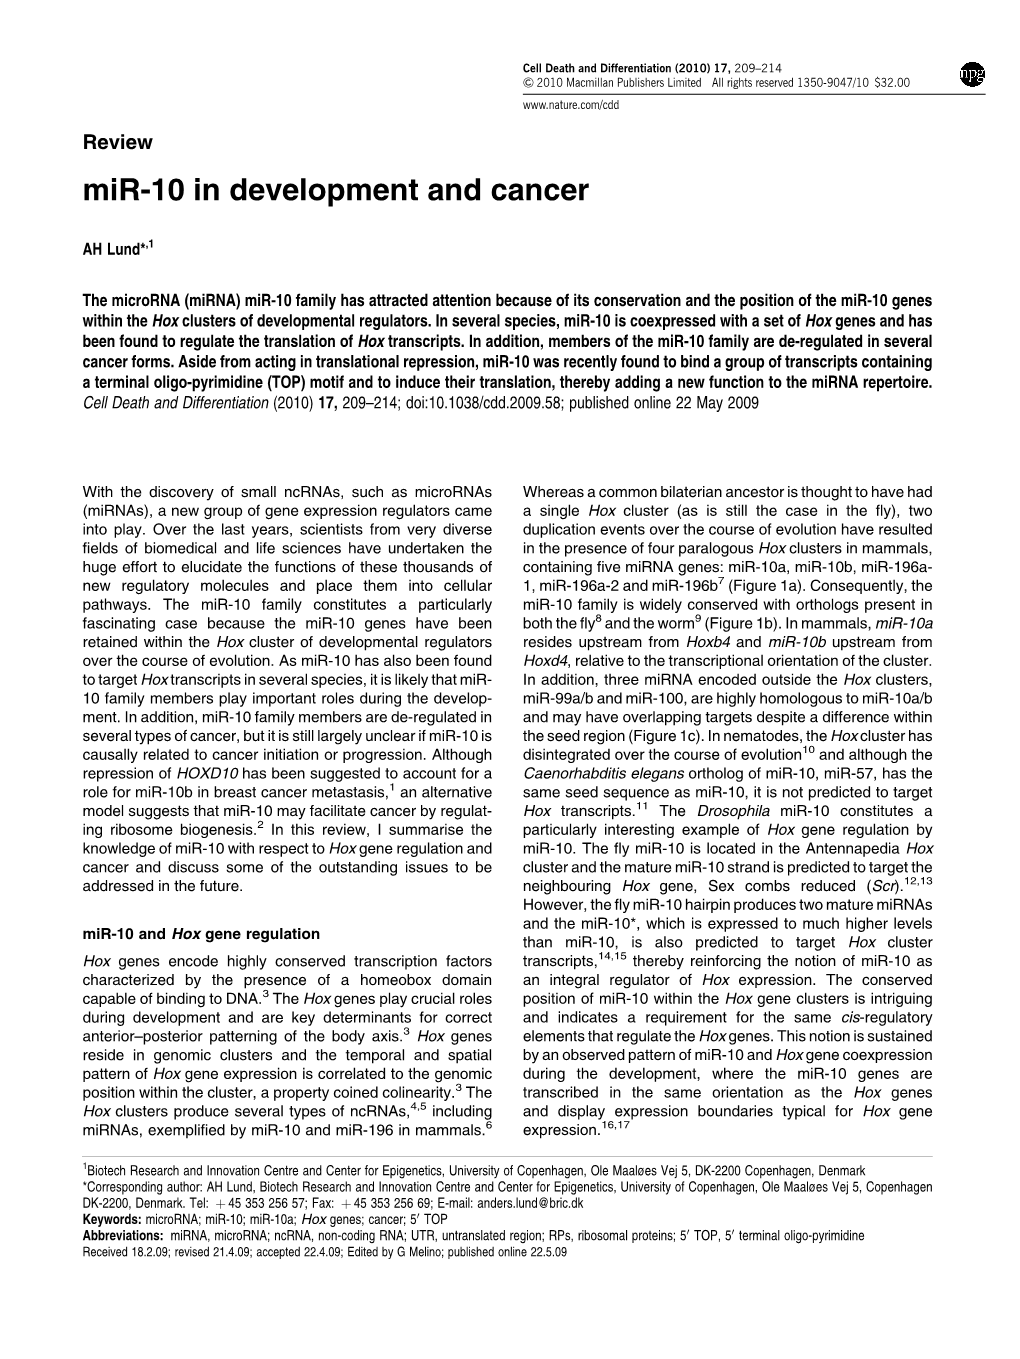 Mir-10 in Development and Cancer